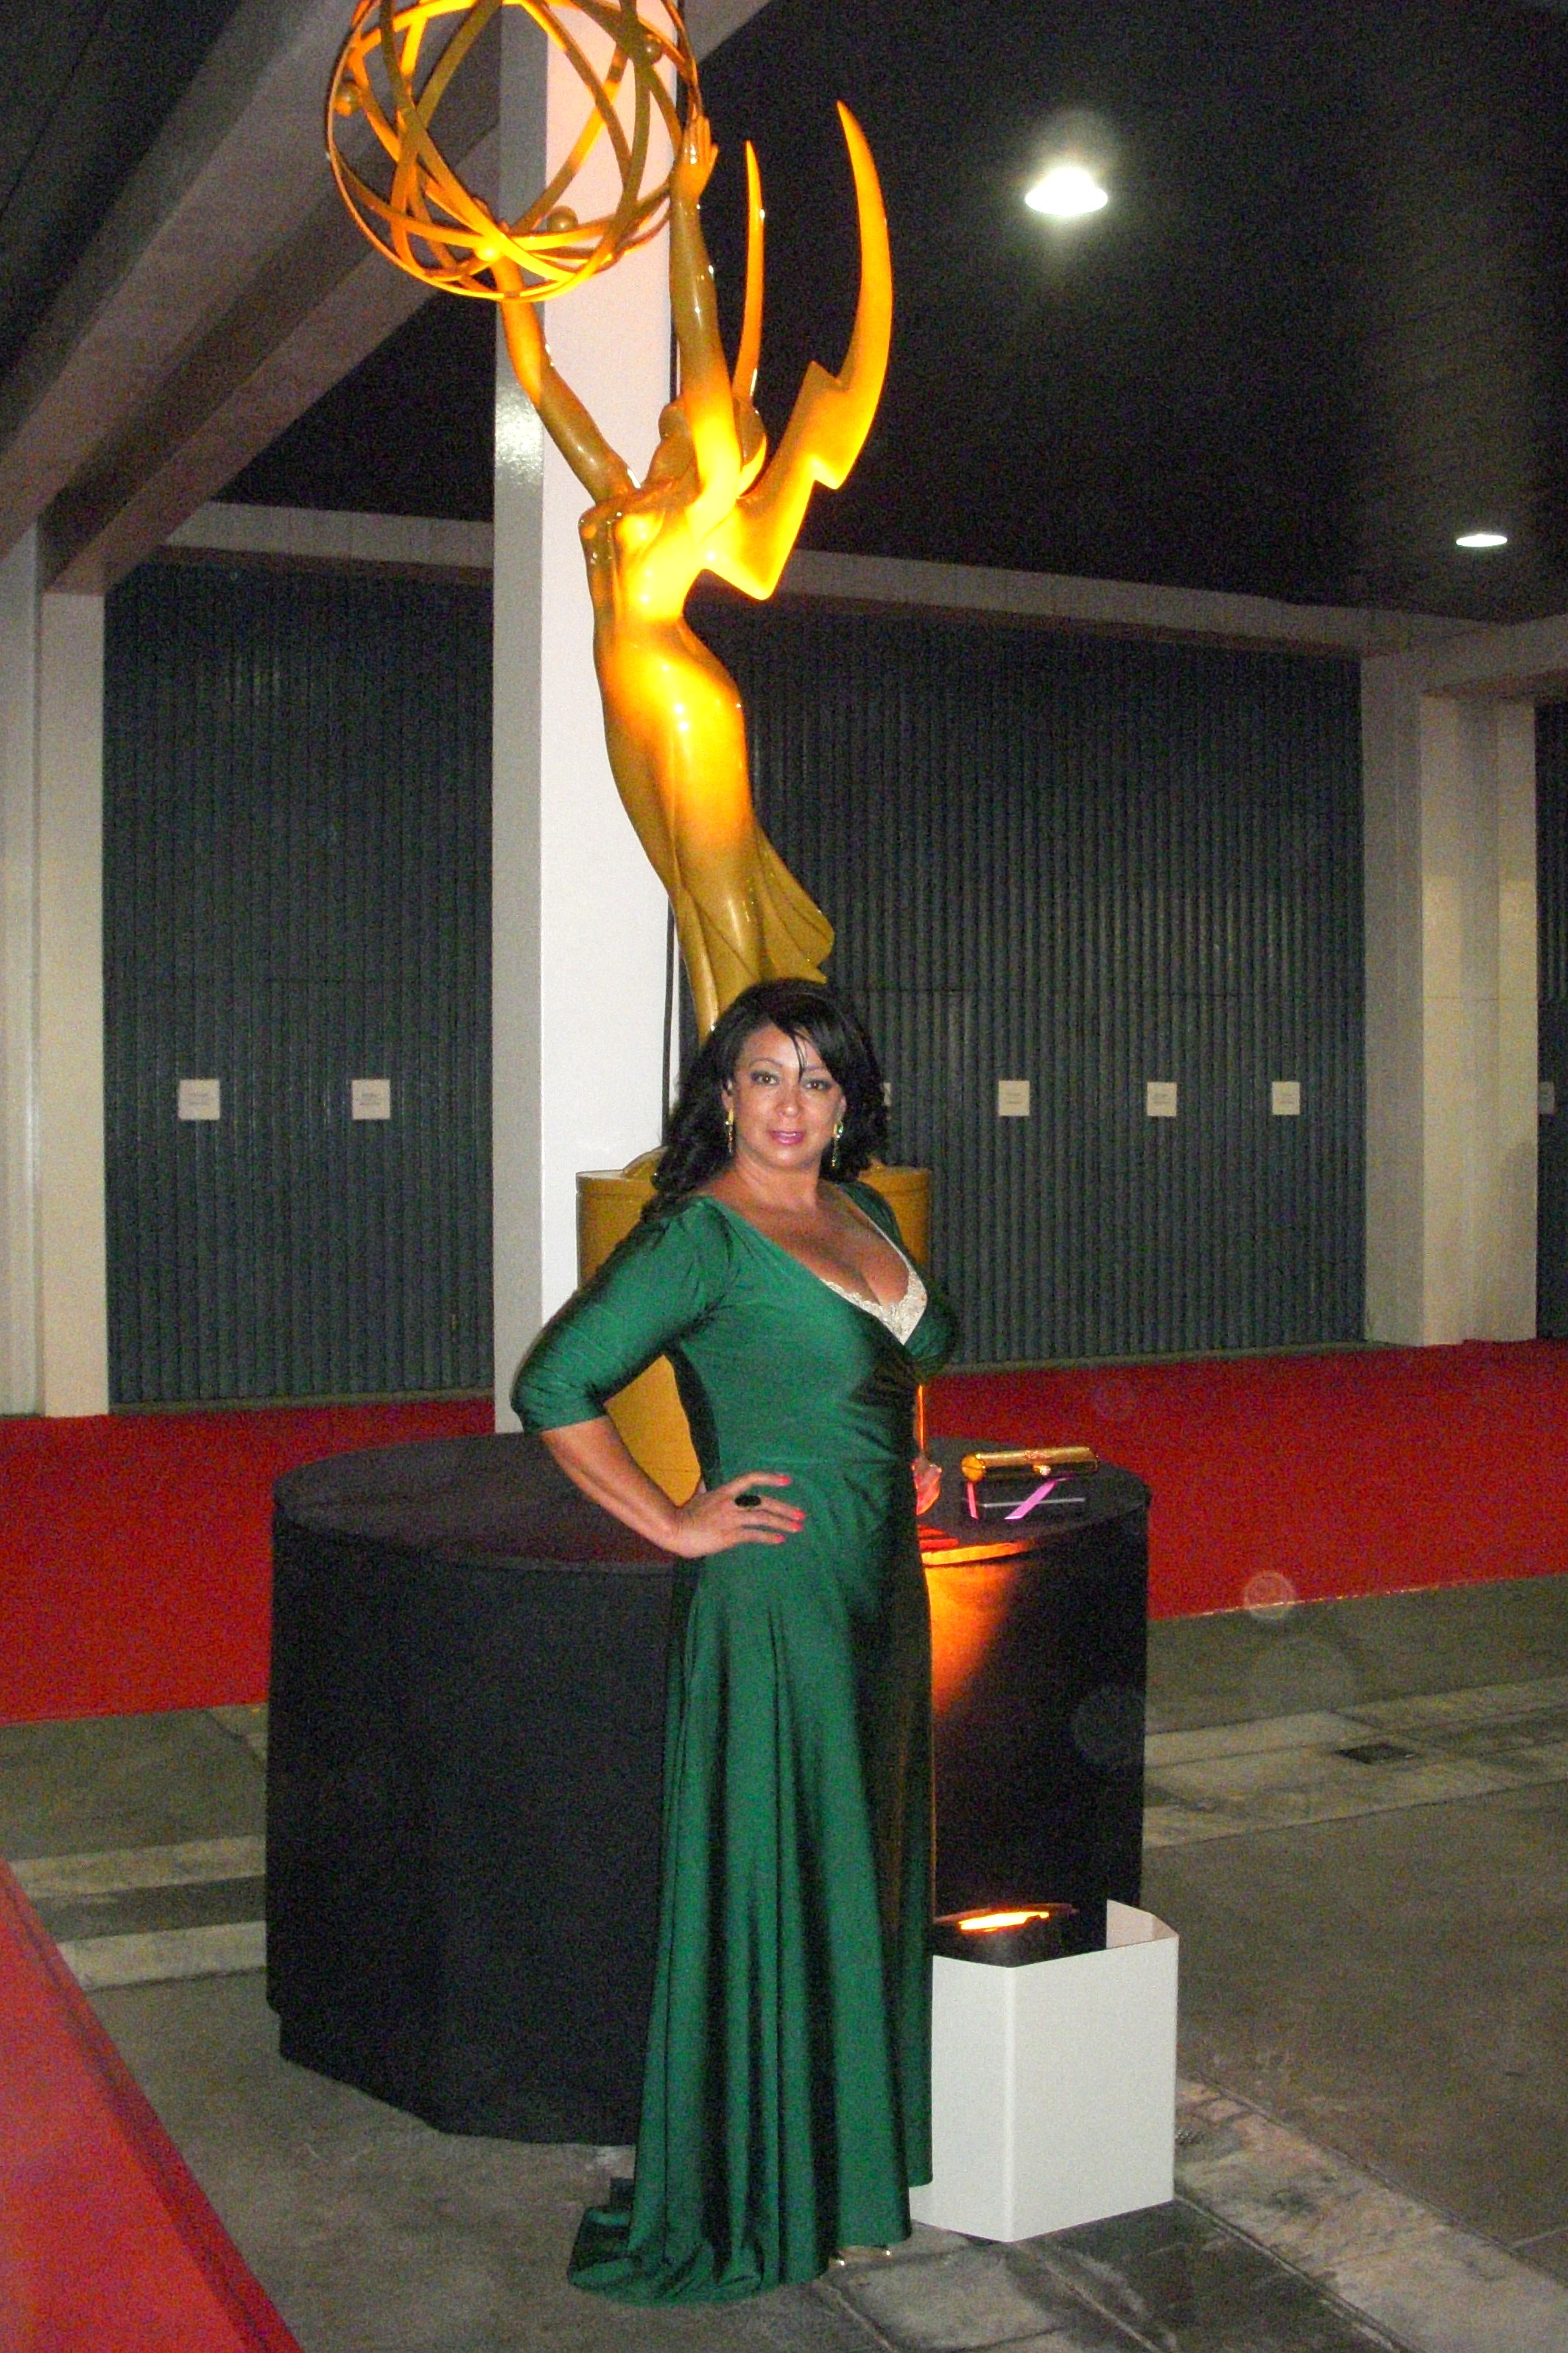 Isabella Wall at the Emmys 2008 in Jorge Diep